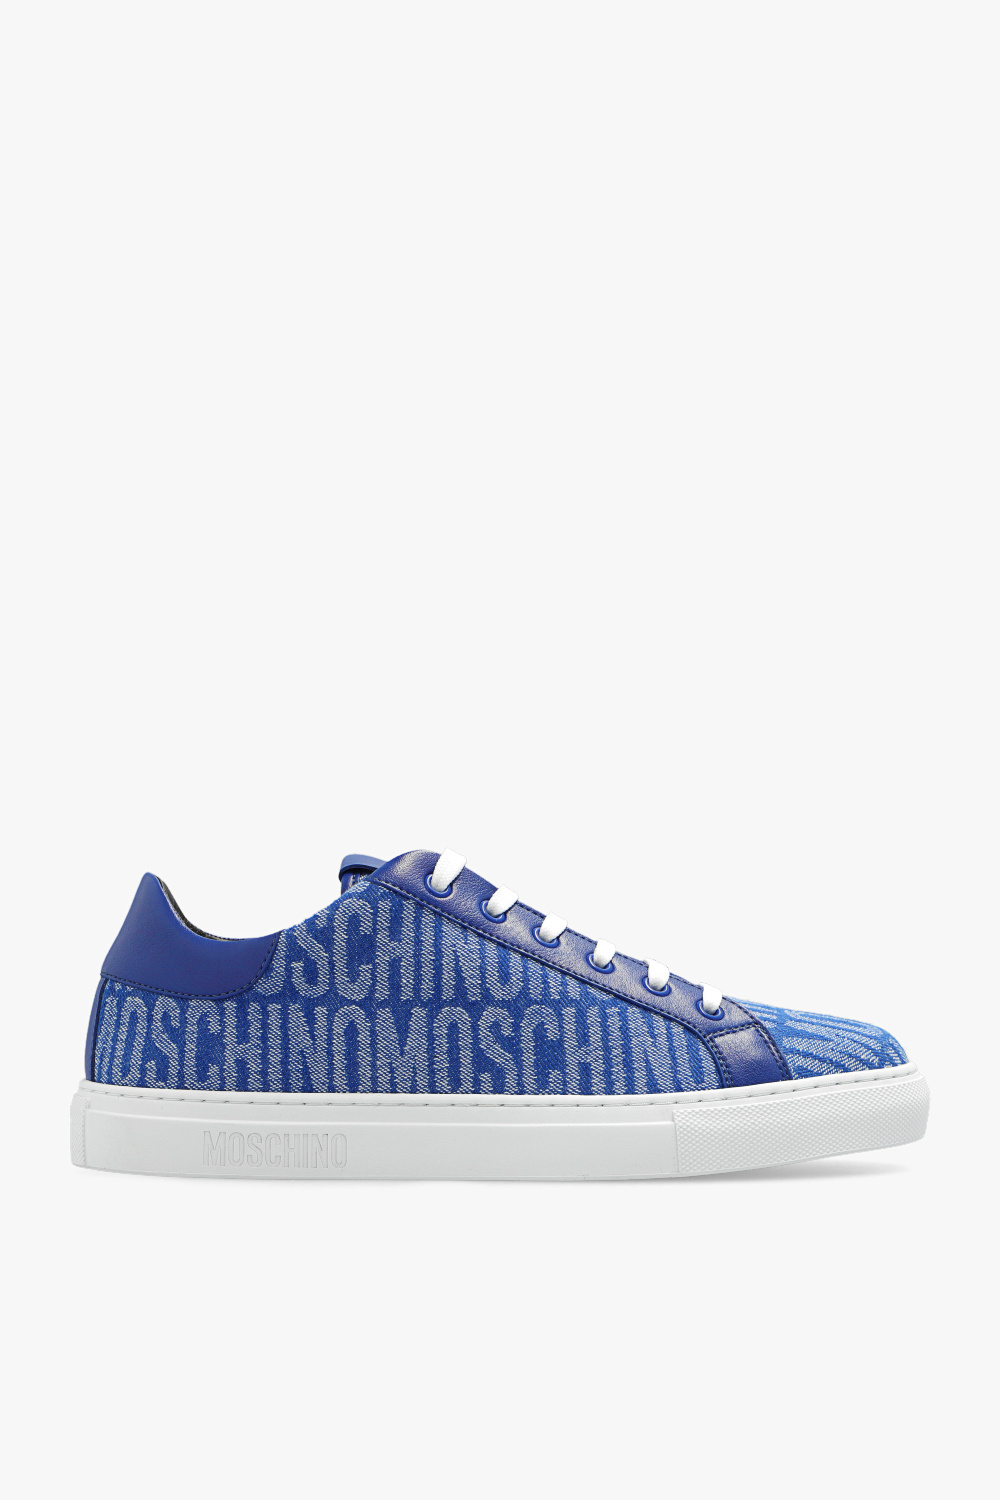 Moschino logo-print touch strap sneakers